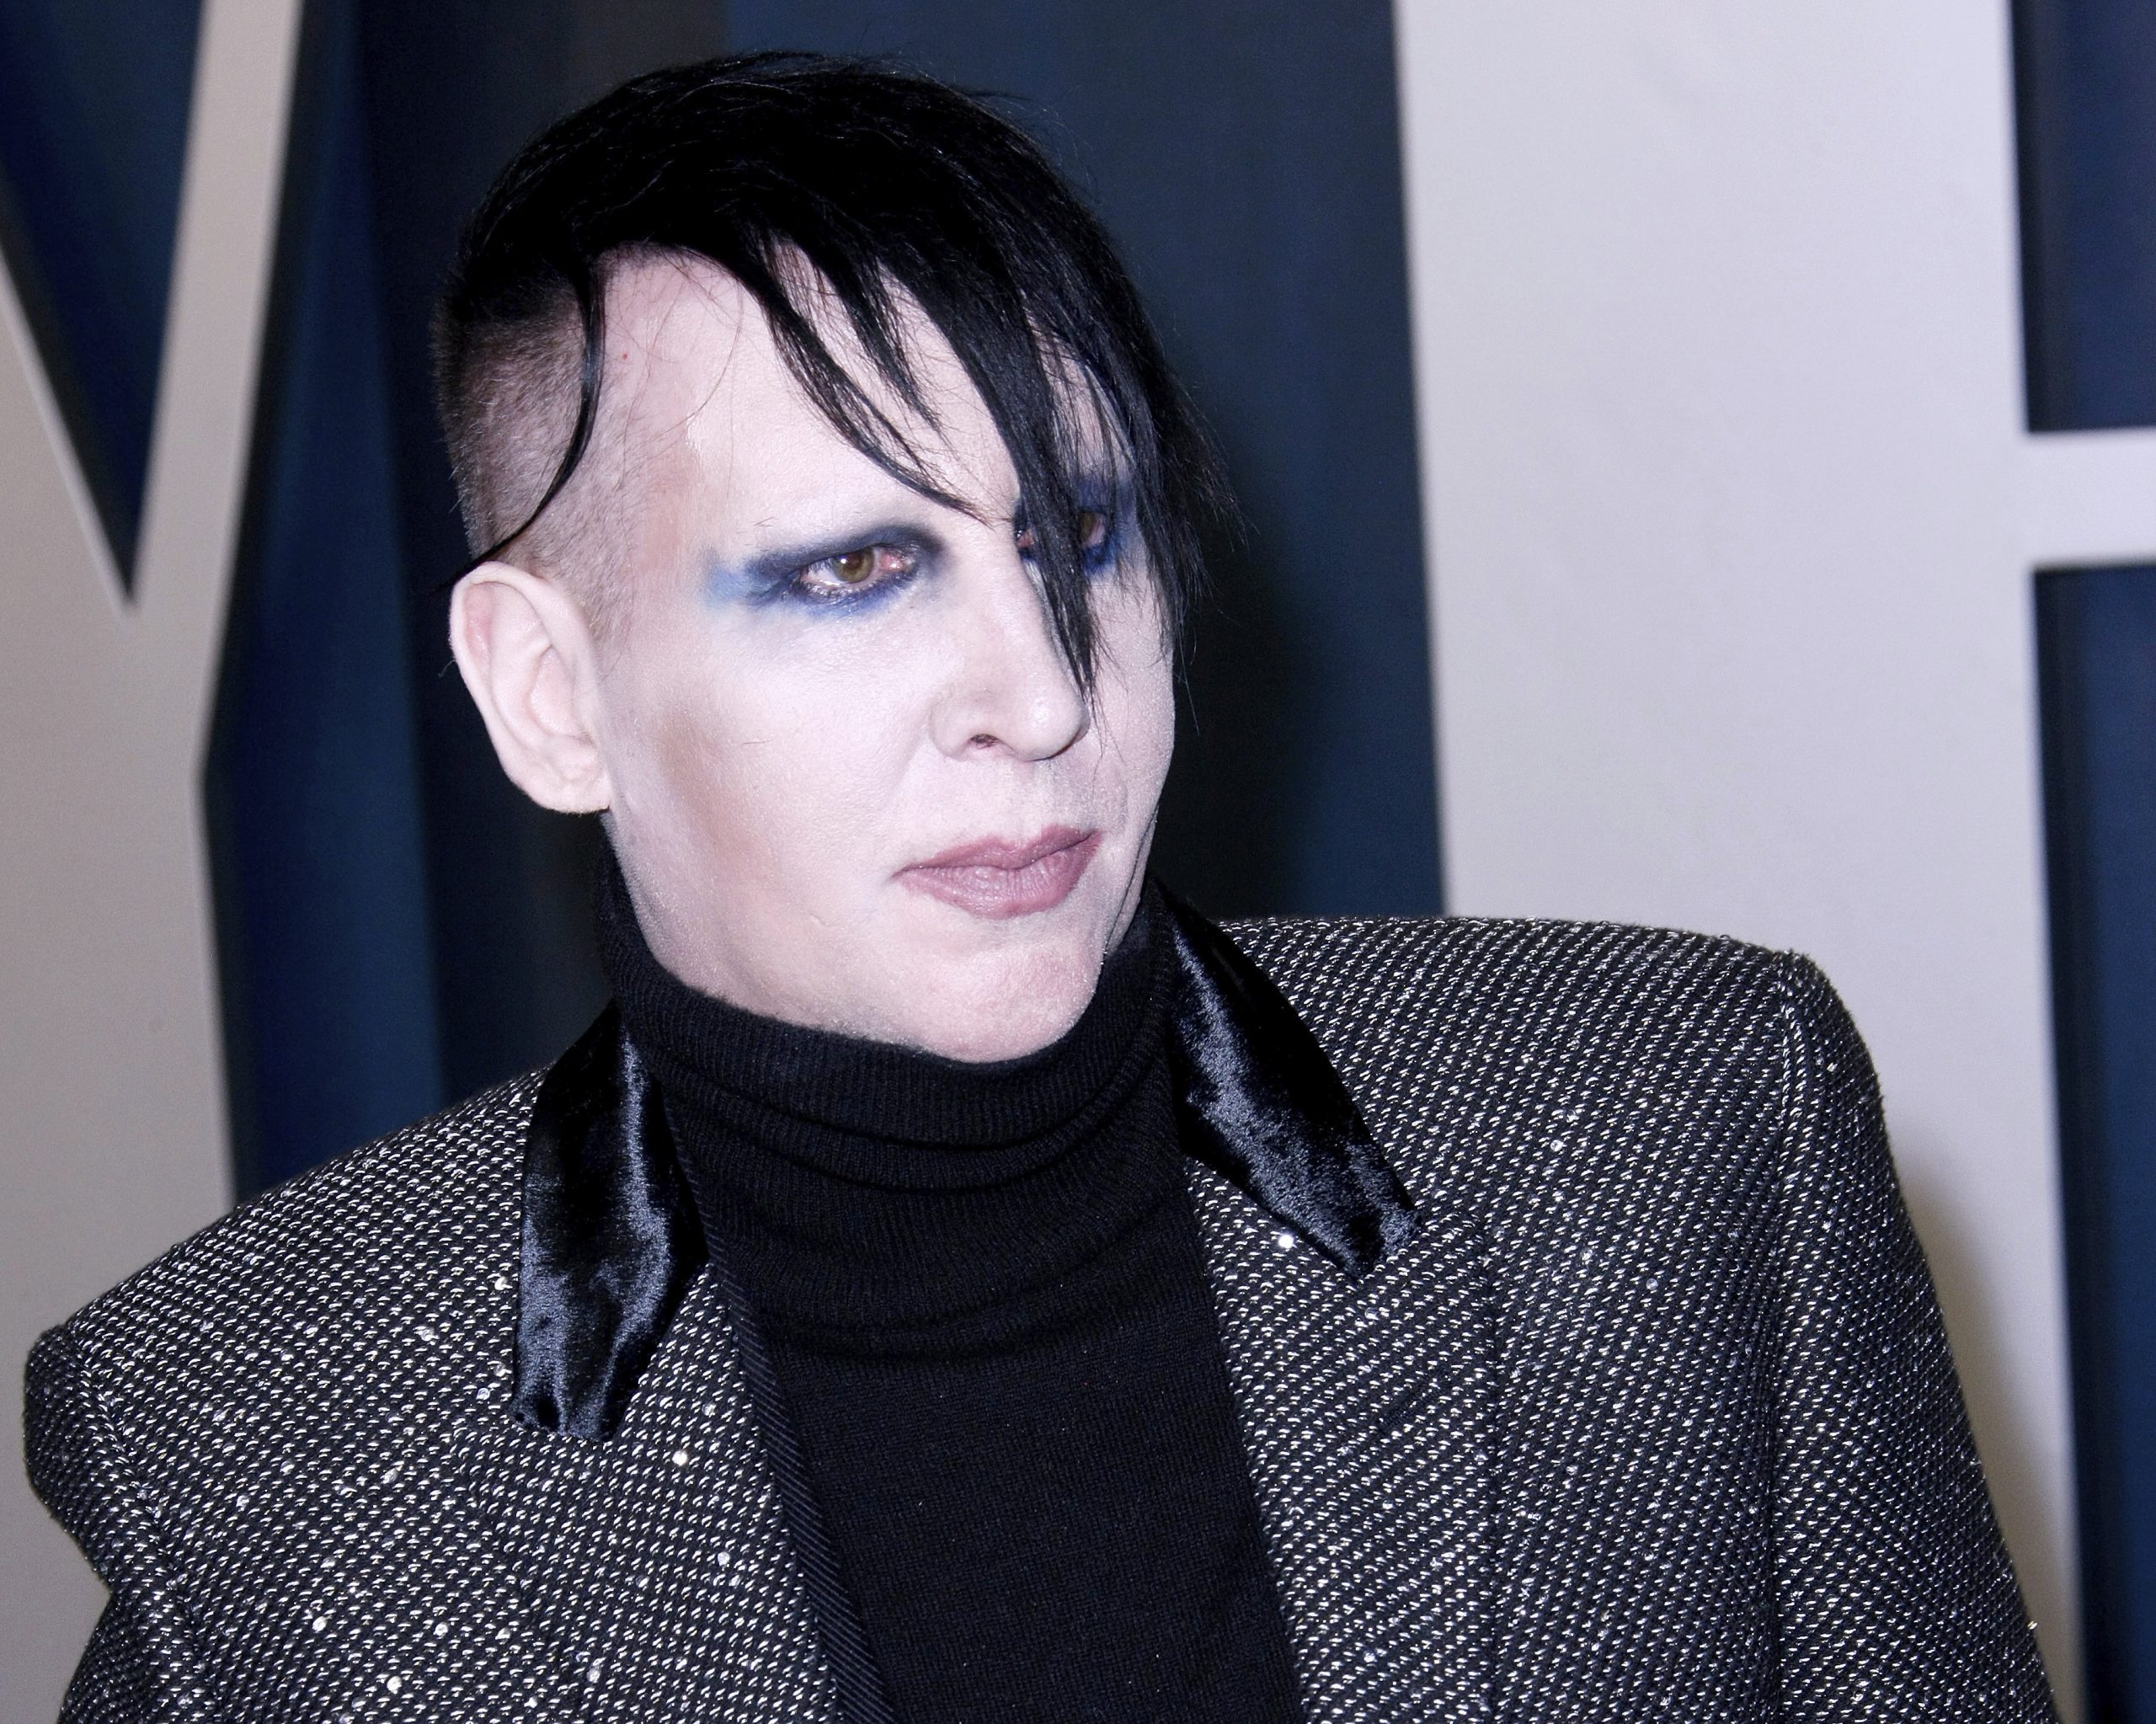 BEVERLY HILLS, CALIFORNIA - FEBRUARY 9: Marilyn Manson attends the 2020 Vanity Fair Oscar Party at Wallis Annenberg Center for the Performing Arts on February 9, 2020 in Beverly Hills, California. Photo: CraSH/imageSPACE/Sipa USA(Sipa via AP Images)